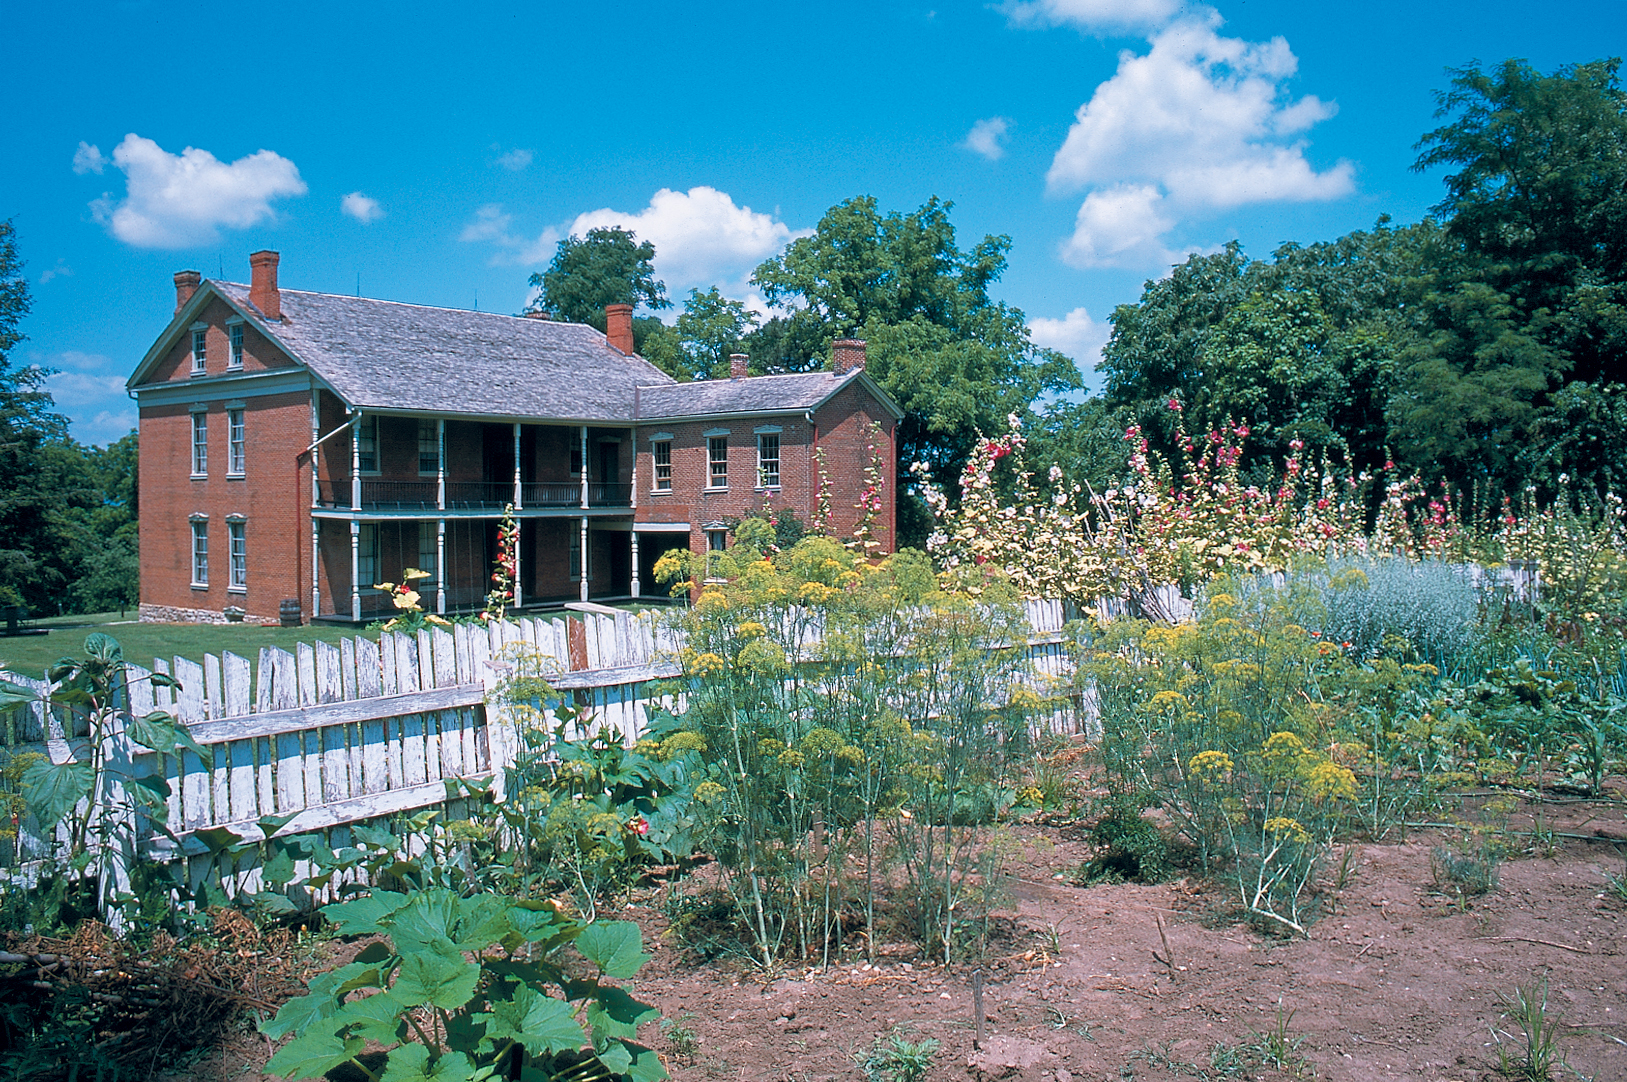 Exterior of the two-story, red brick Anderson House with the gardens in the foreground